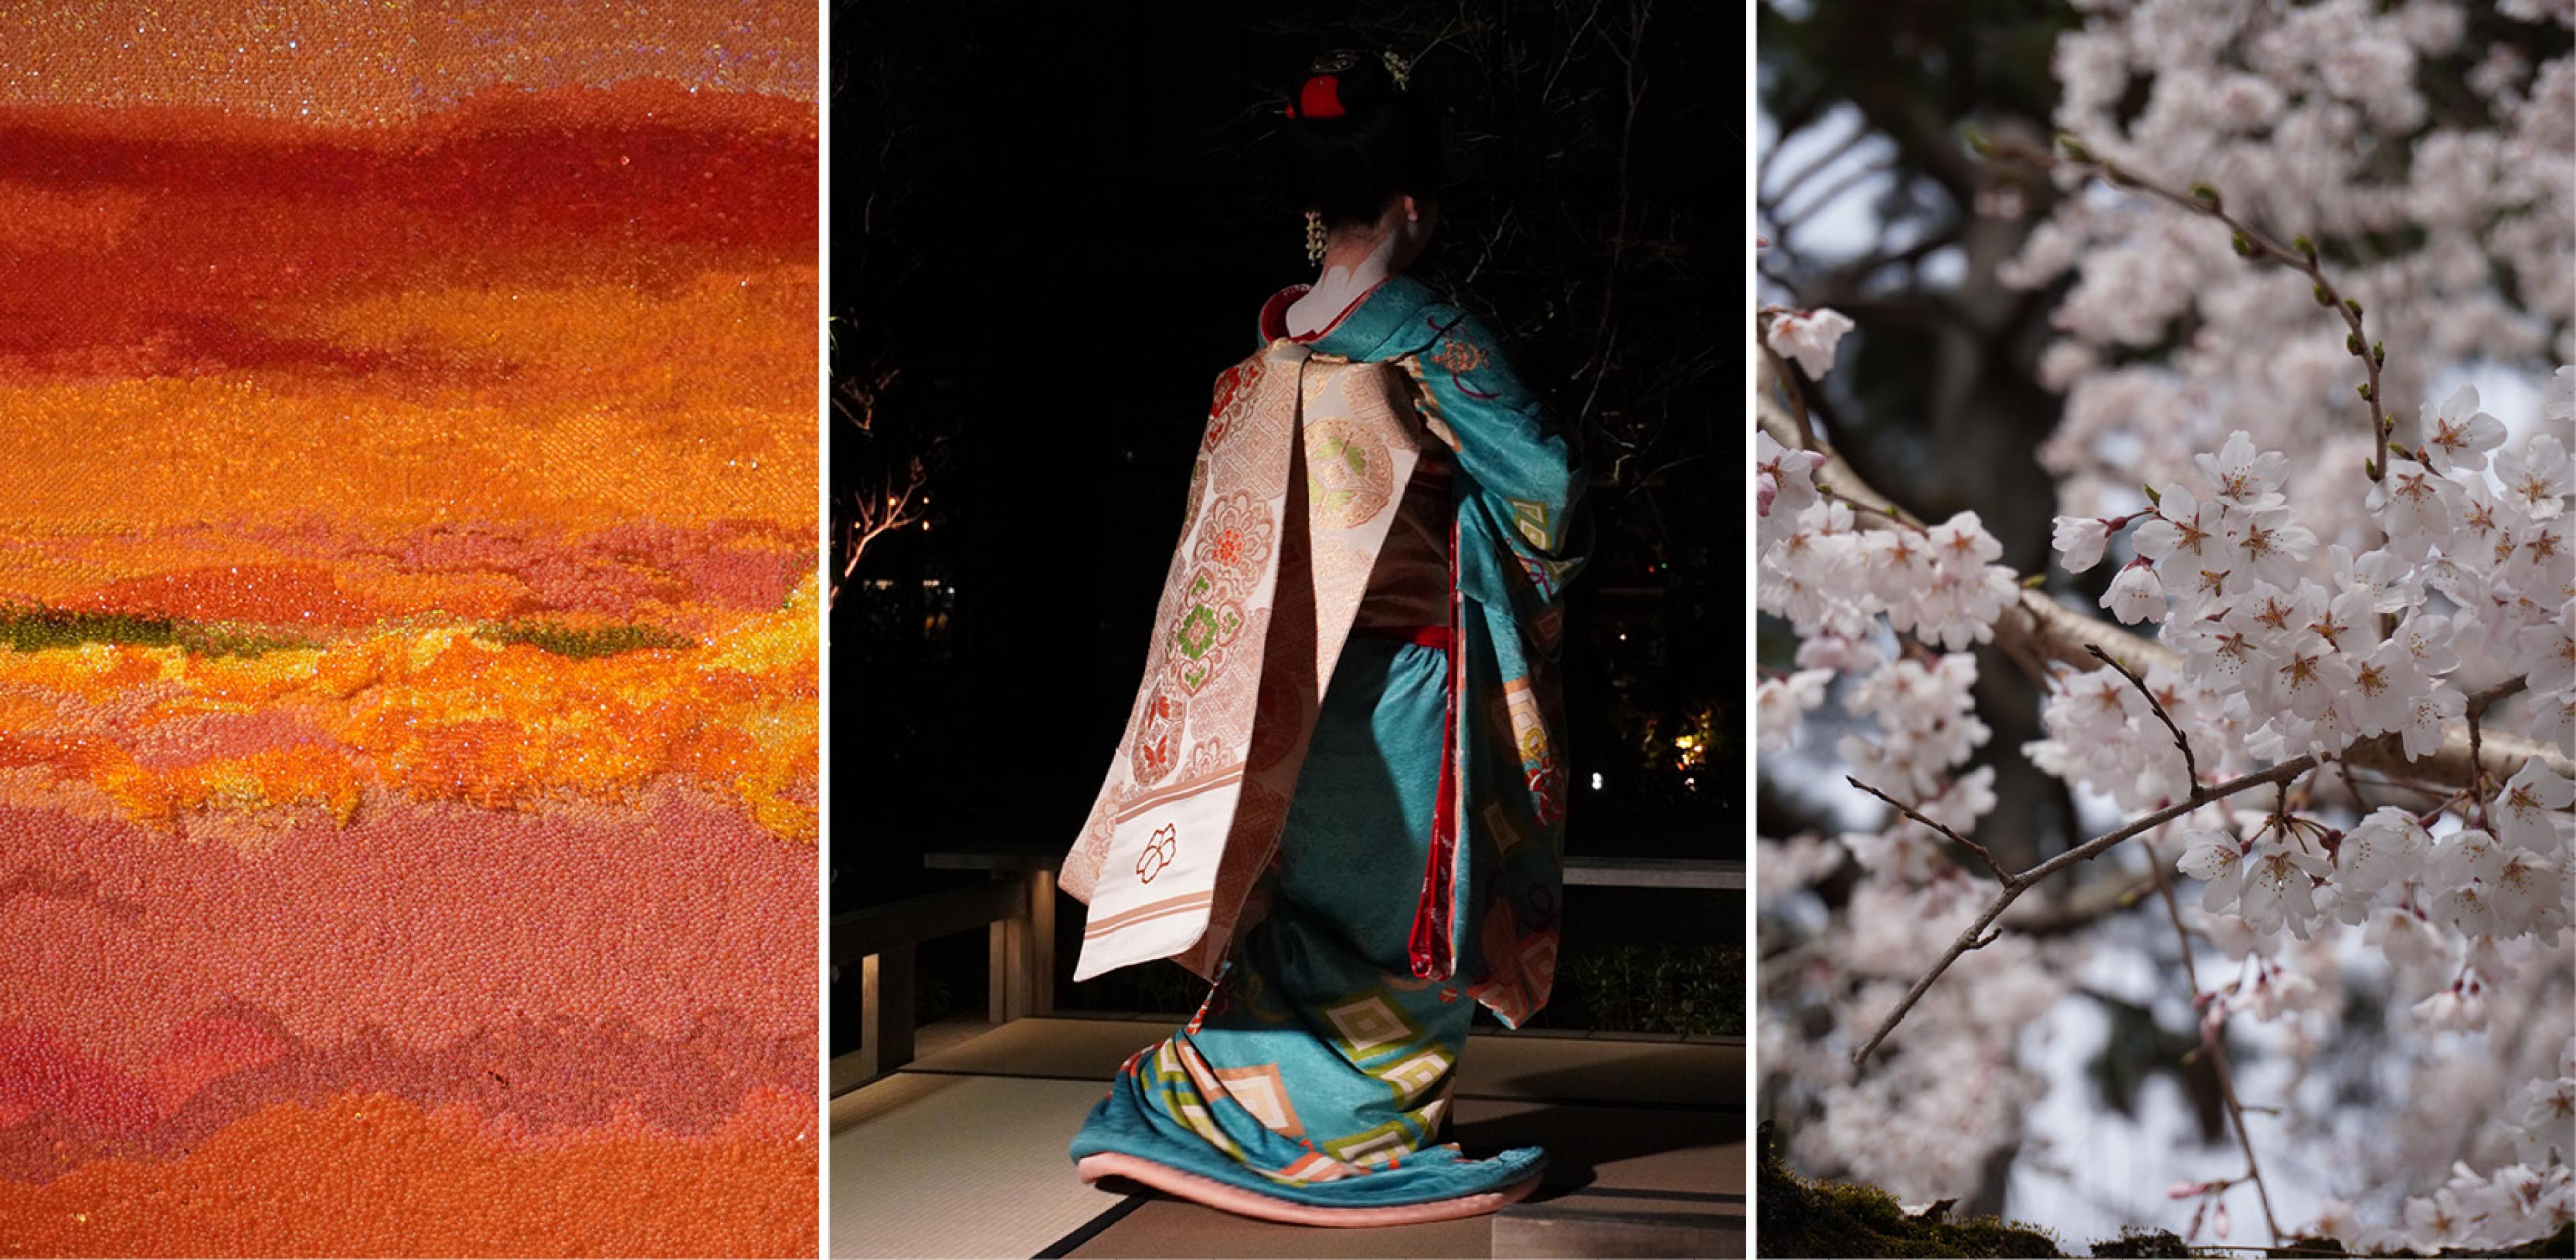 The mural by Vietnamese artist Tia-Thuy Nguyen at The Shinmonzen in Kyoto; a maiko performs for an exclusive experience at Hotel the Mitsui in Kyoto; early sakura season cherry blossoms in Kyoto